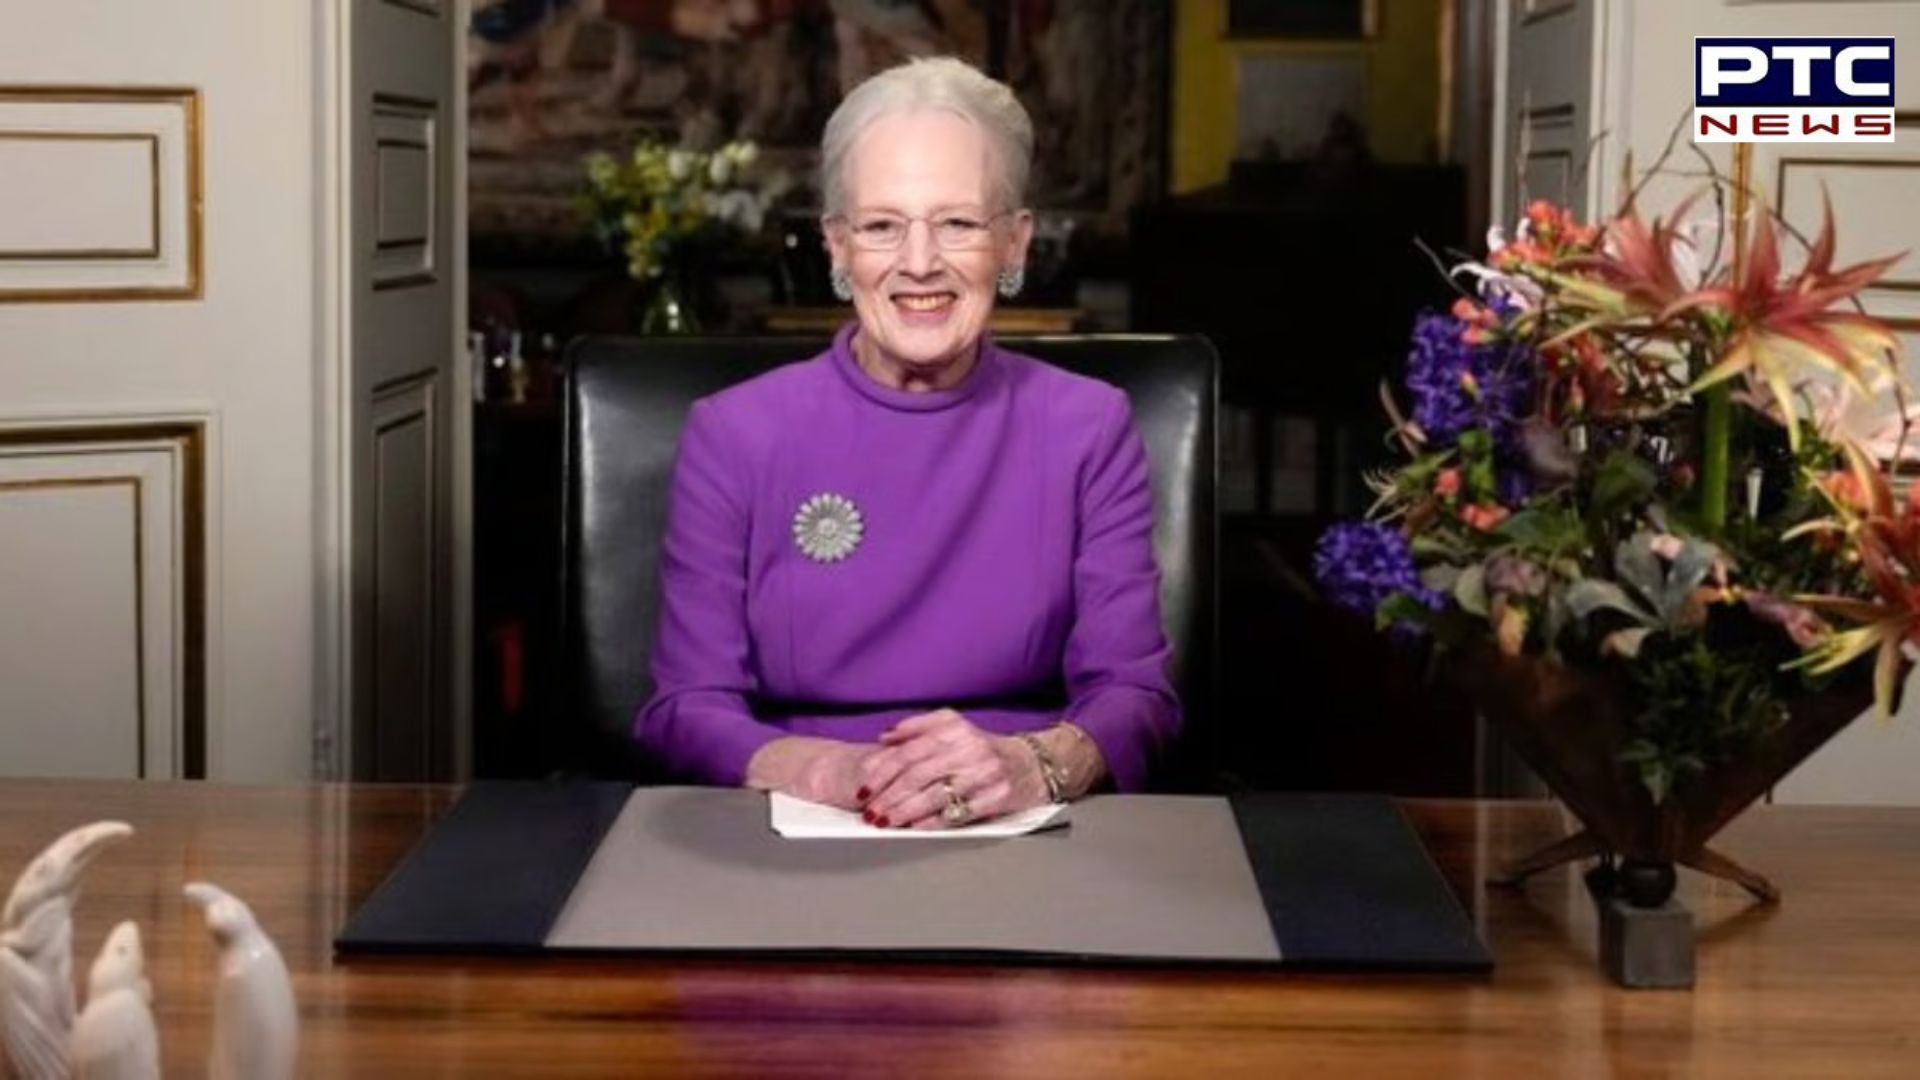 Denmark's Queen Margrethe II announces abdication after 52-year reign